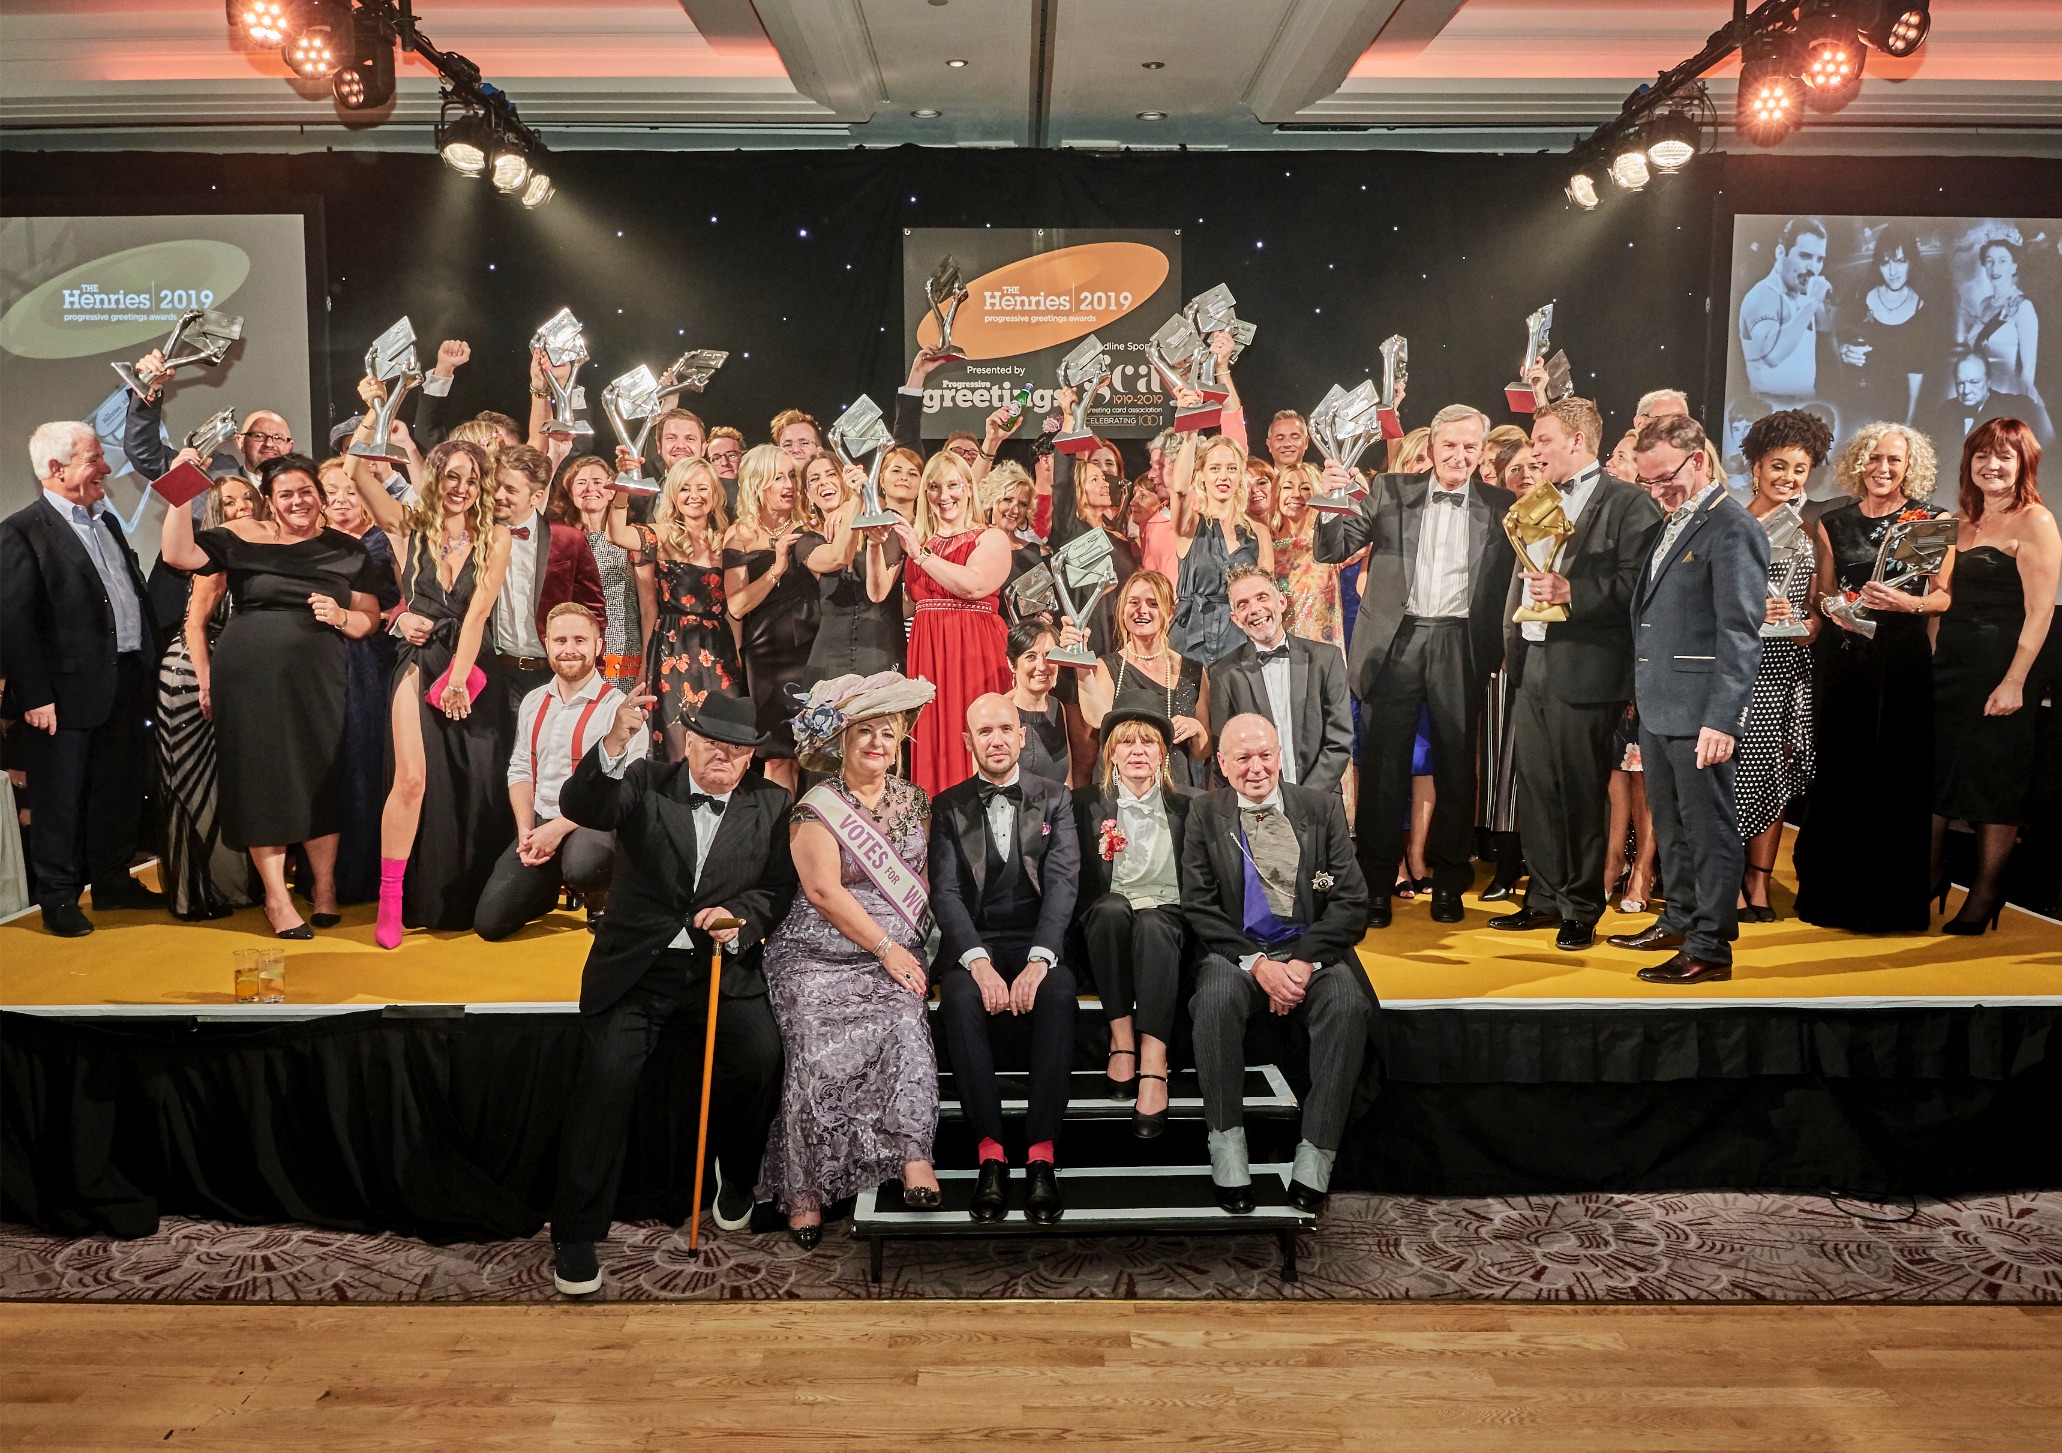 Above: The happy winners at The Henries 2019, the last ‘real’ awards event.